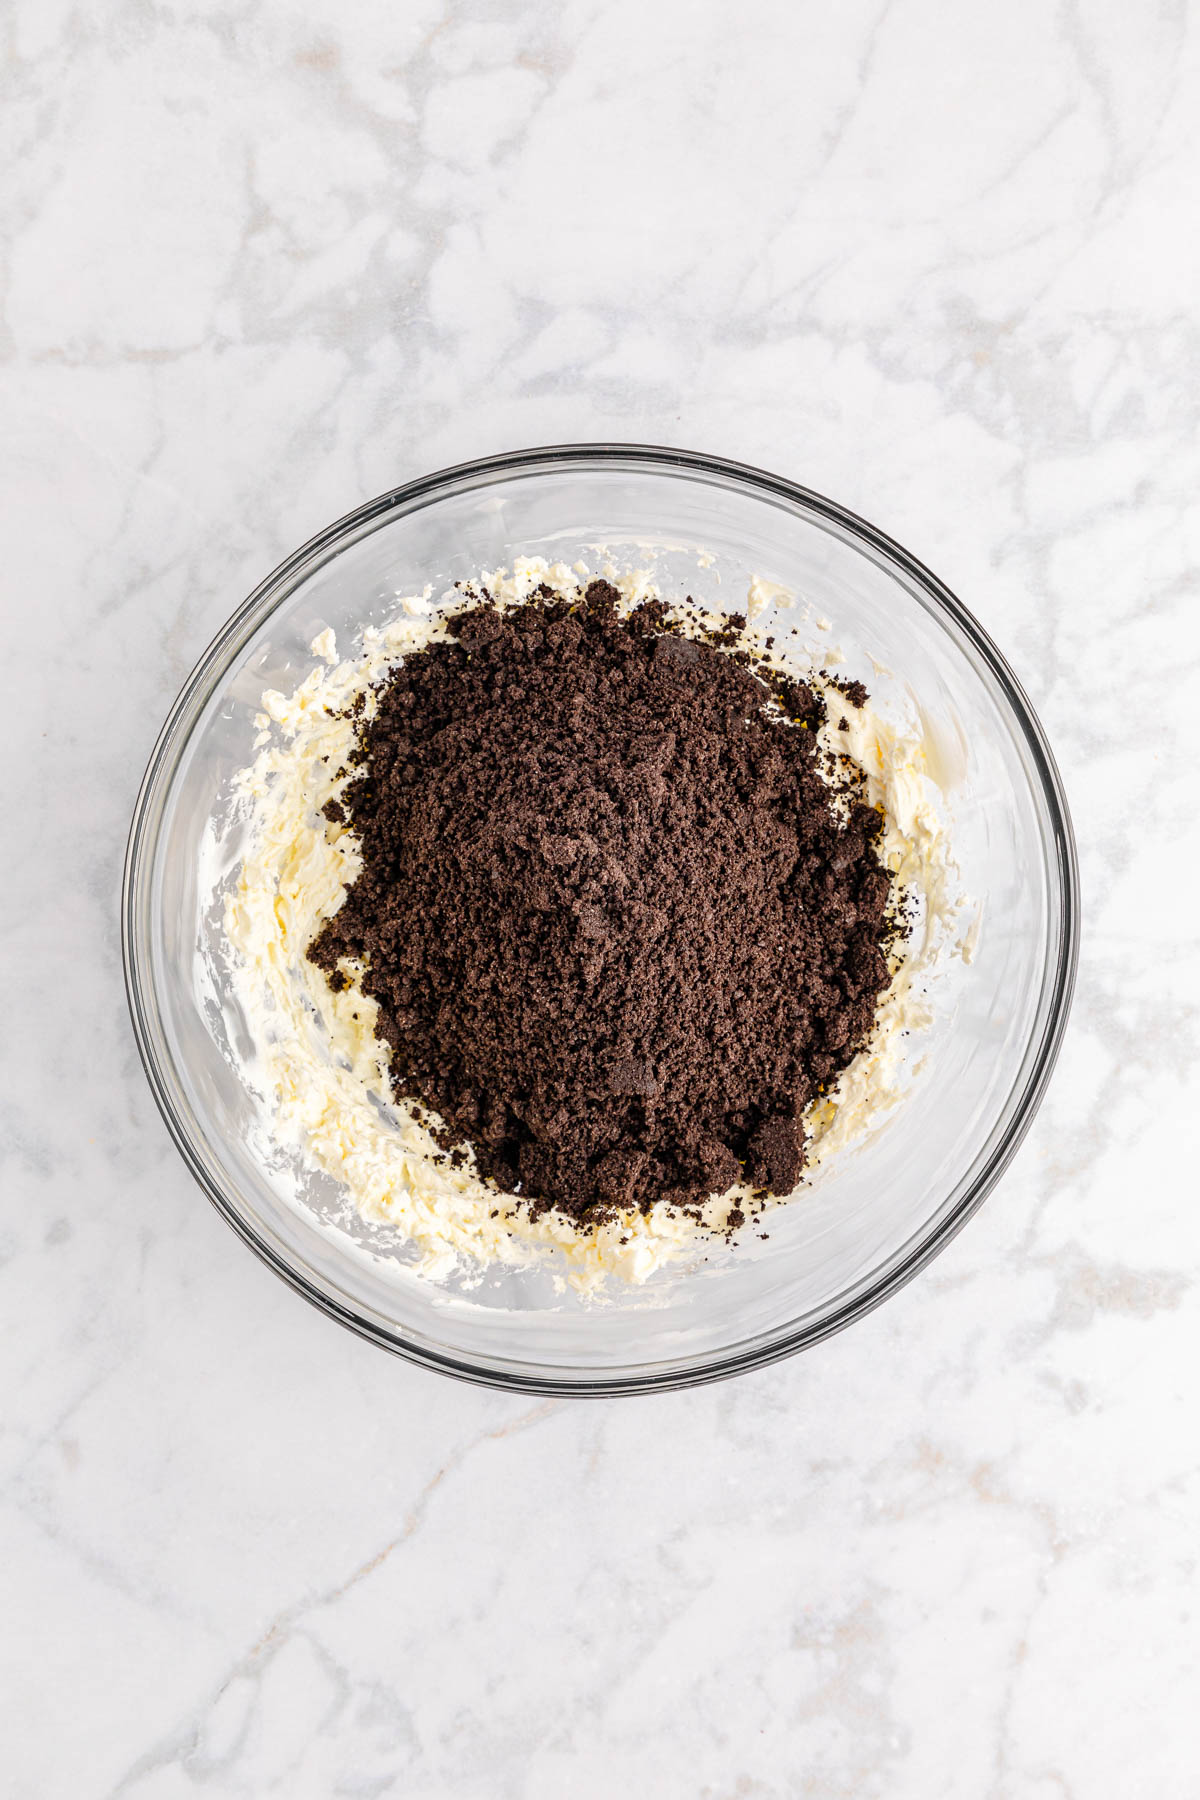 A glass bowl filled with a mixture of Oreo crumbs and cream cheese